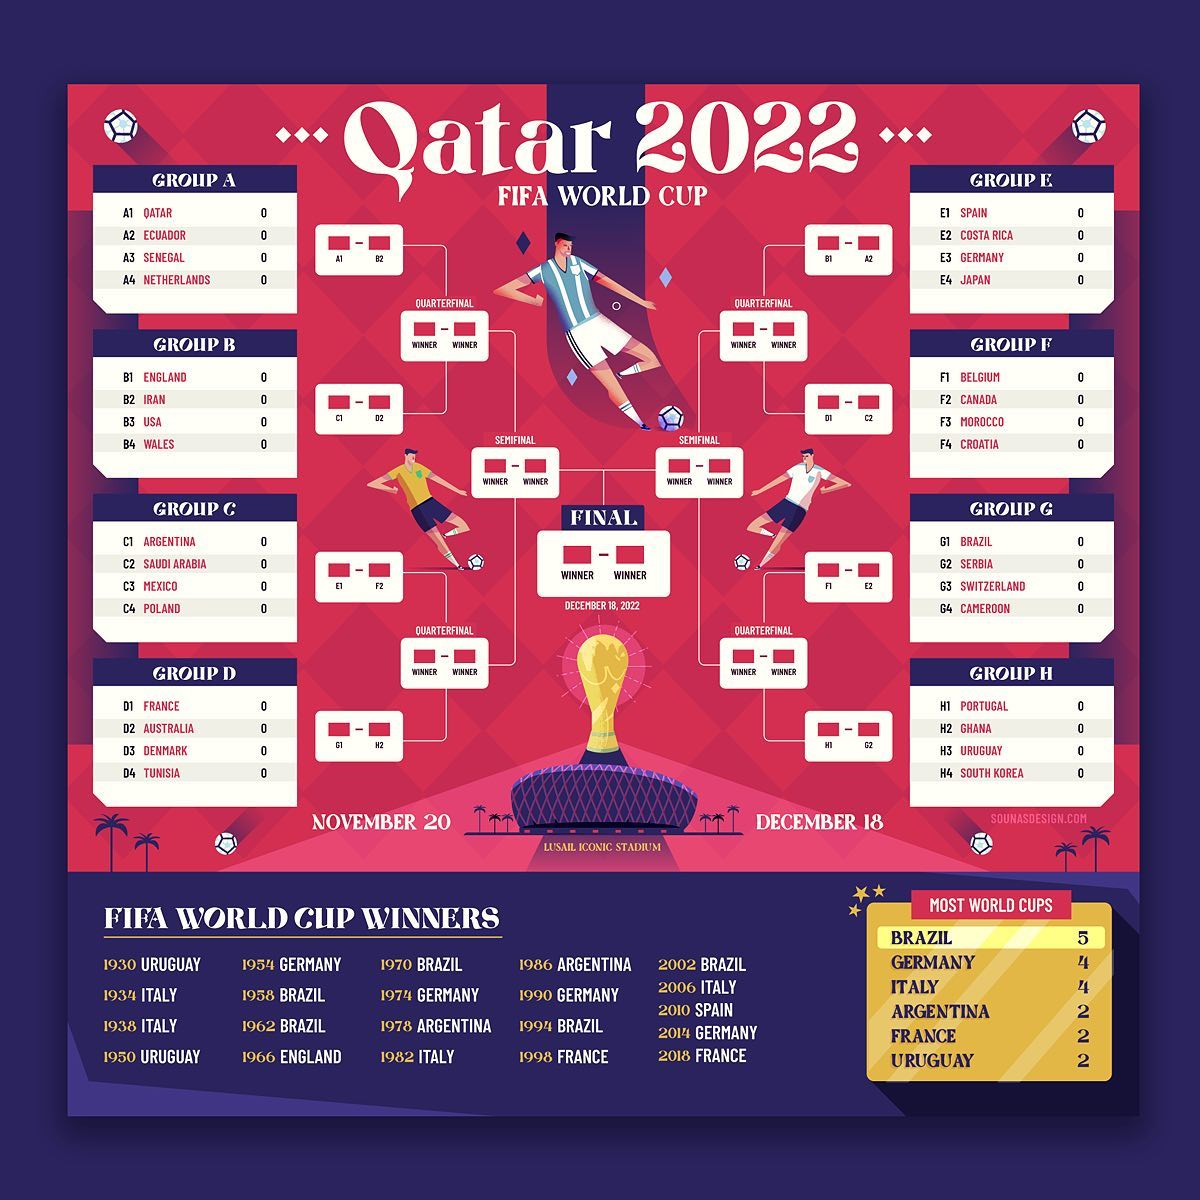 :::Qatar World Cup 2022:::The World Cup kicks-off in Qatar this year and the football fans are thrilled.My prediction for the 2022 final winner: Argentina..Adobe Illustrator + Photoshop..#argentina #argentinafootball #football #infographic #illustration #graphicdesign #worldcup2022 #qatar2022 #sounasart #qatar #fifaworldcup2022